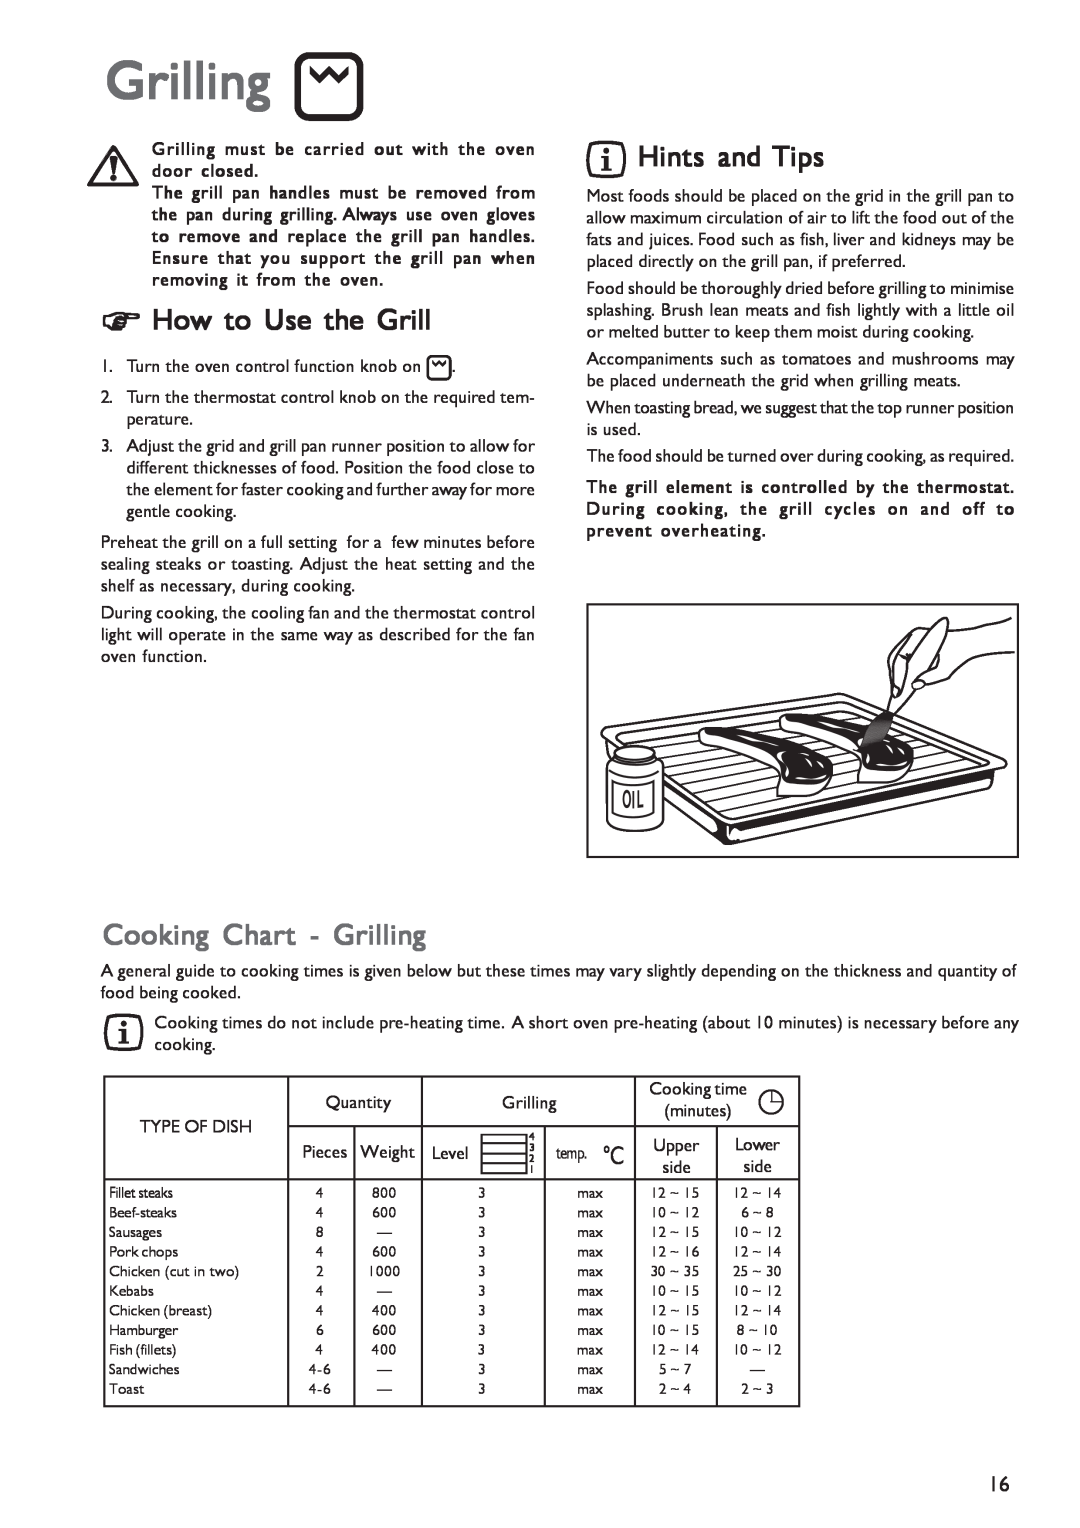 John Lewis JLBIOS601 instruction manual How to Use the Grill, Cooking Chart - Grilling, Hints and Tips 